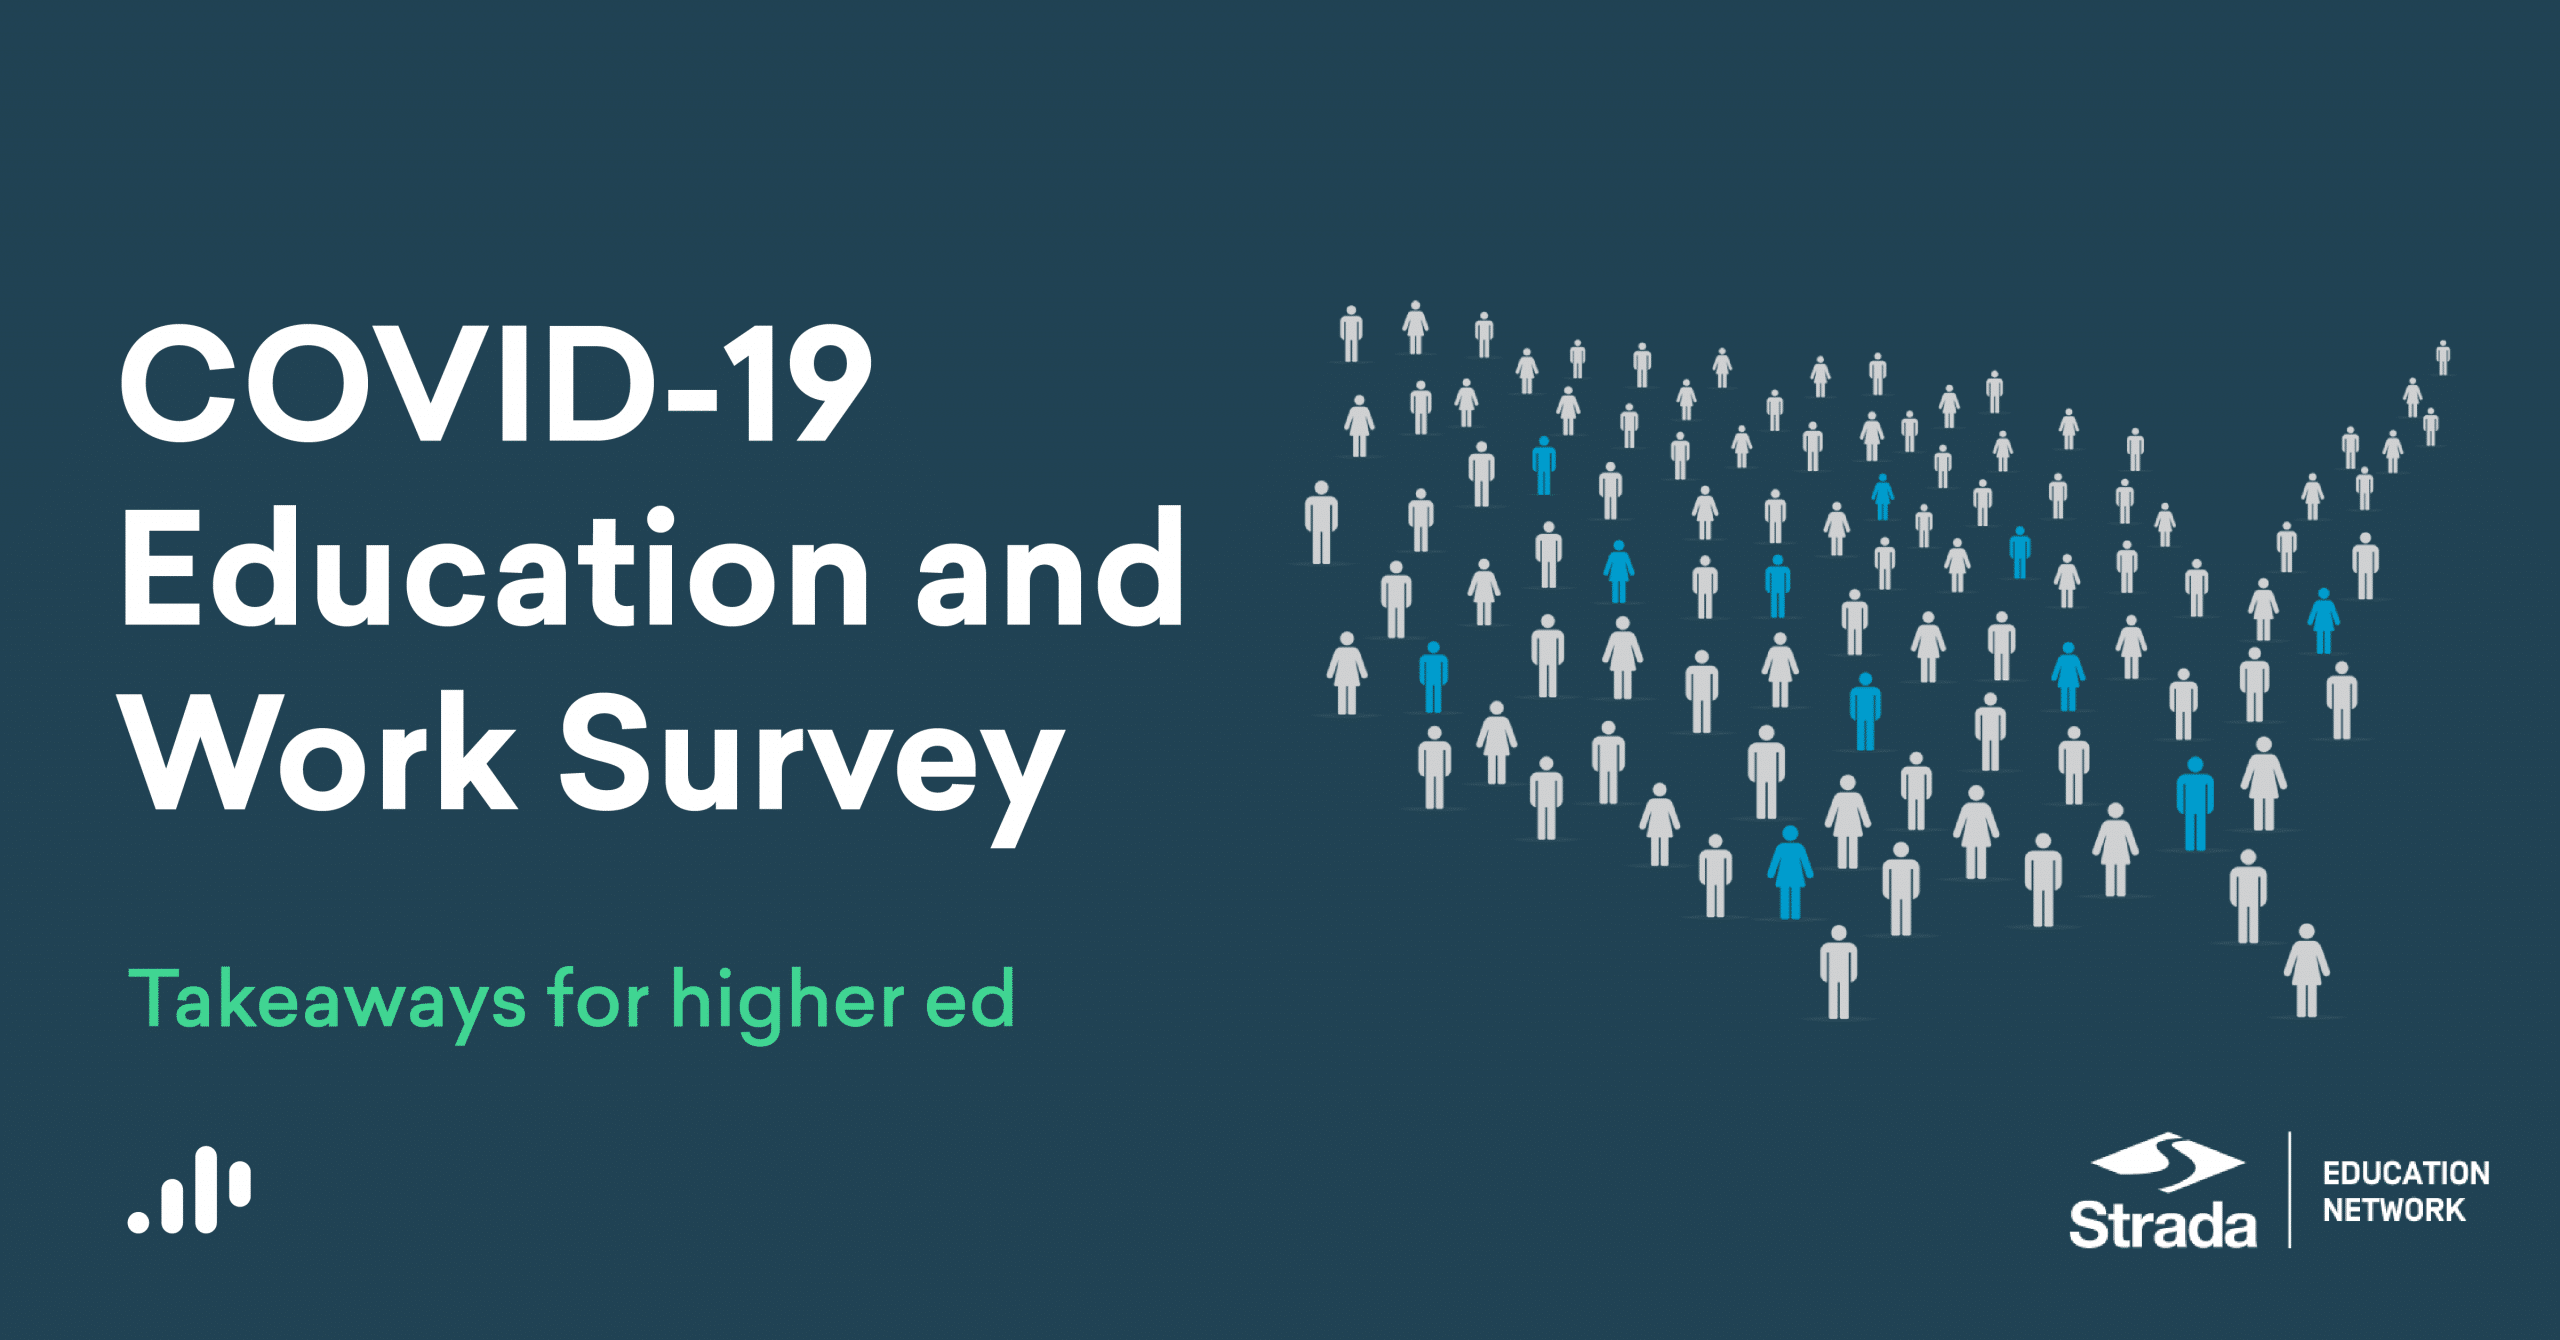 What is the Impact of COVID-19 on Higher Education?